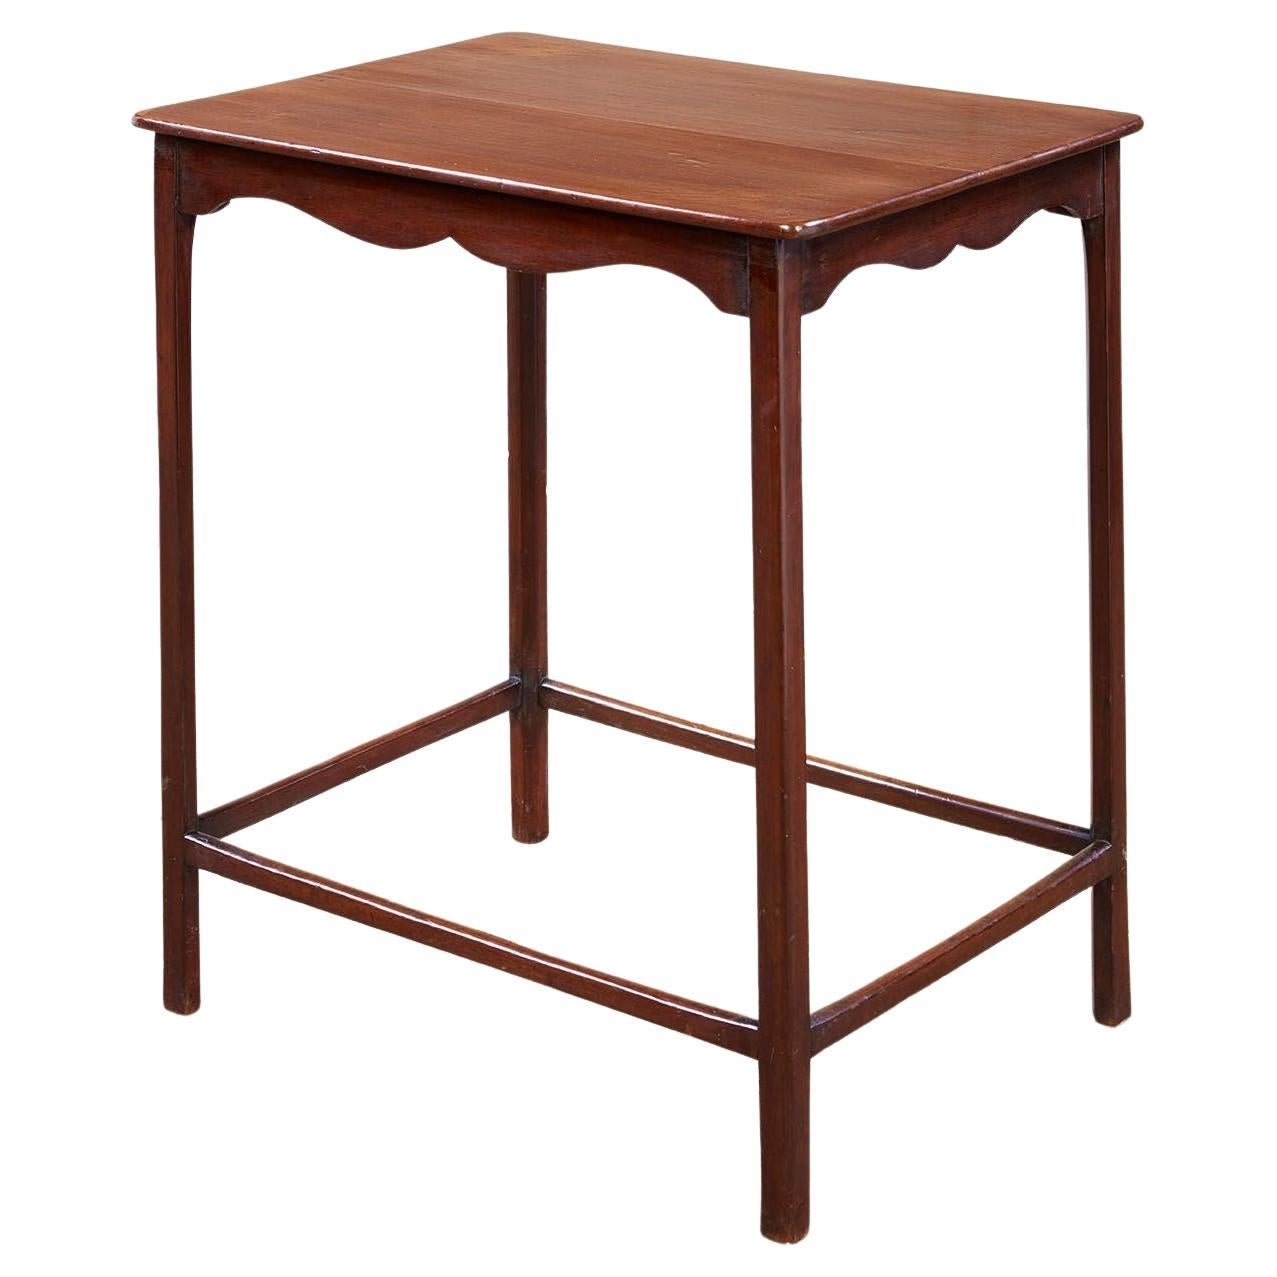 Spider Leg Table For Sale